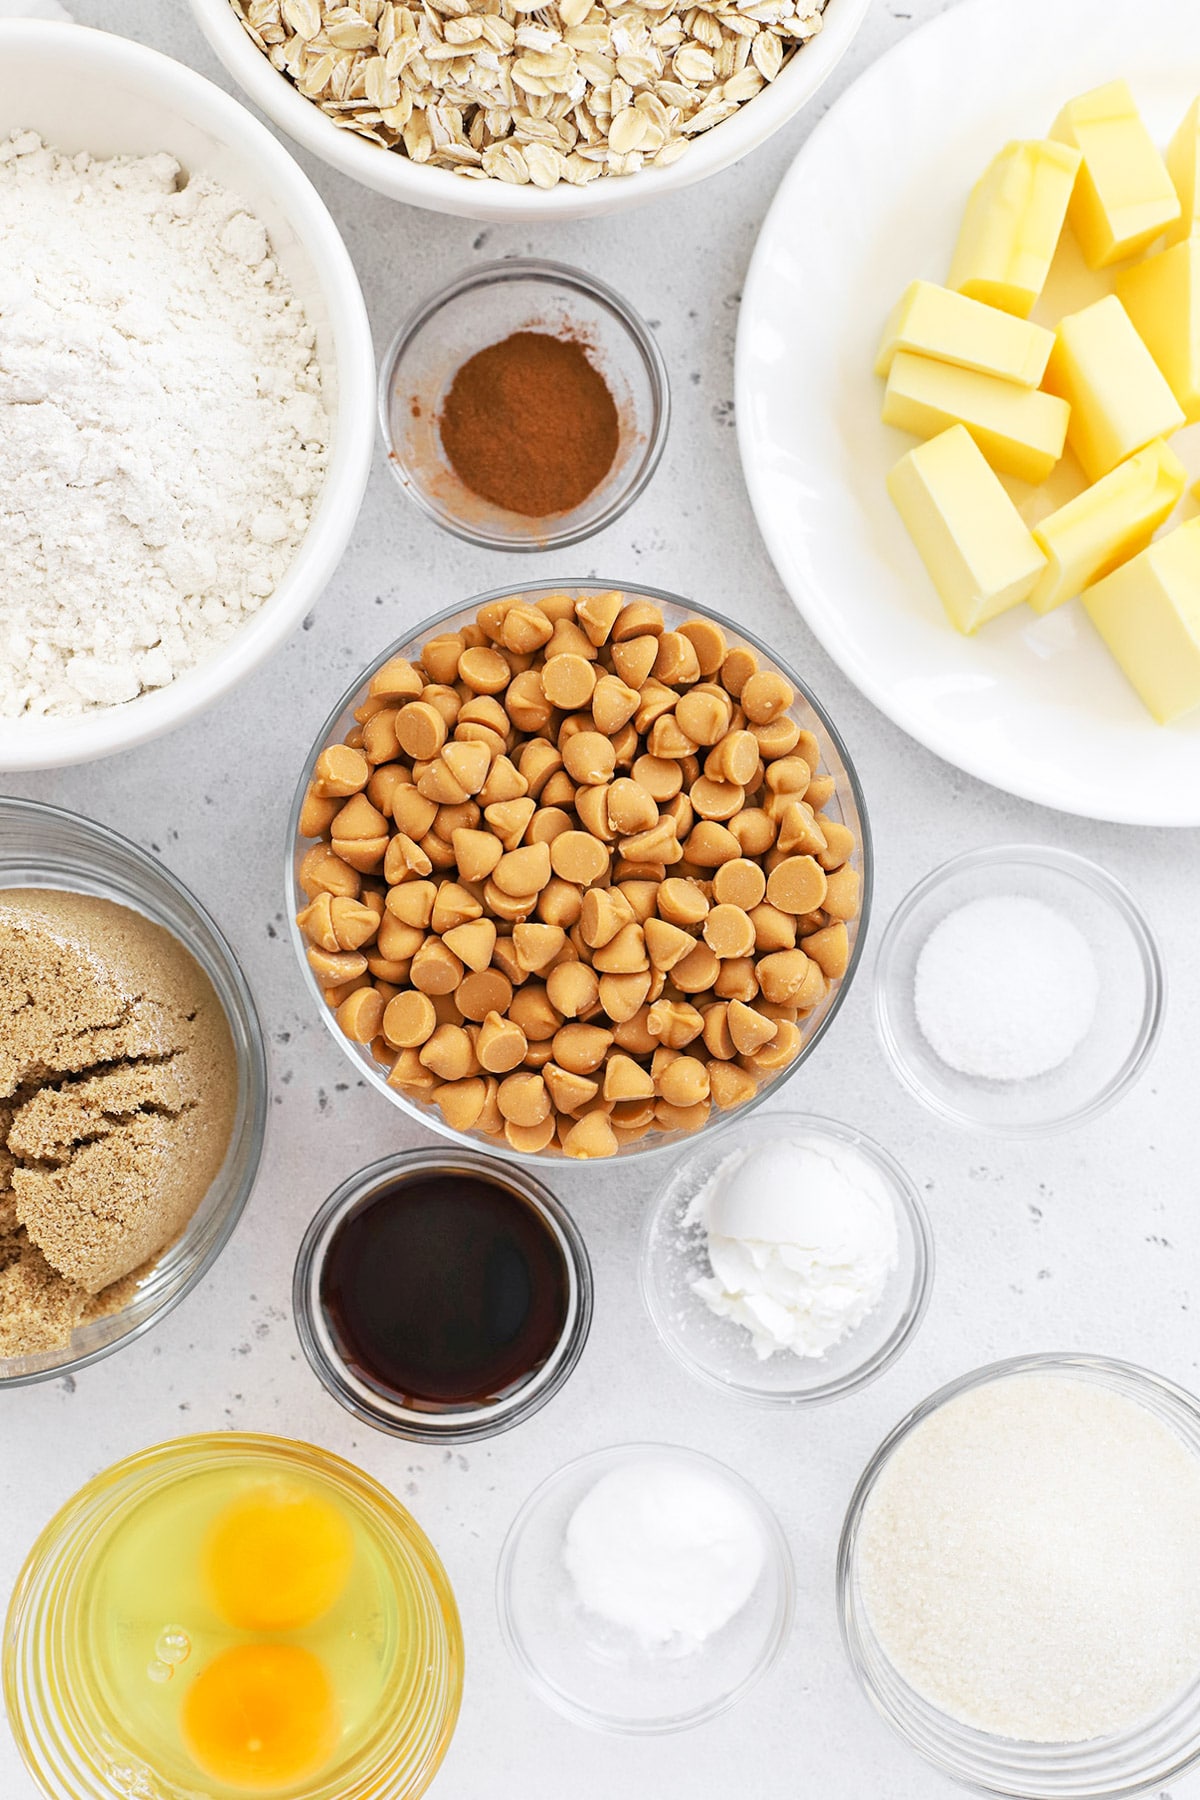 Overhead view of ingredients for gluten-free oatmeal scotchies